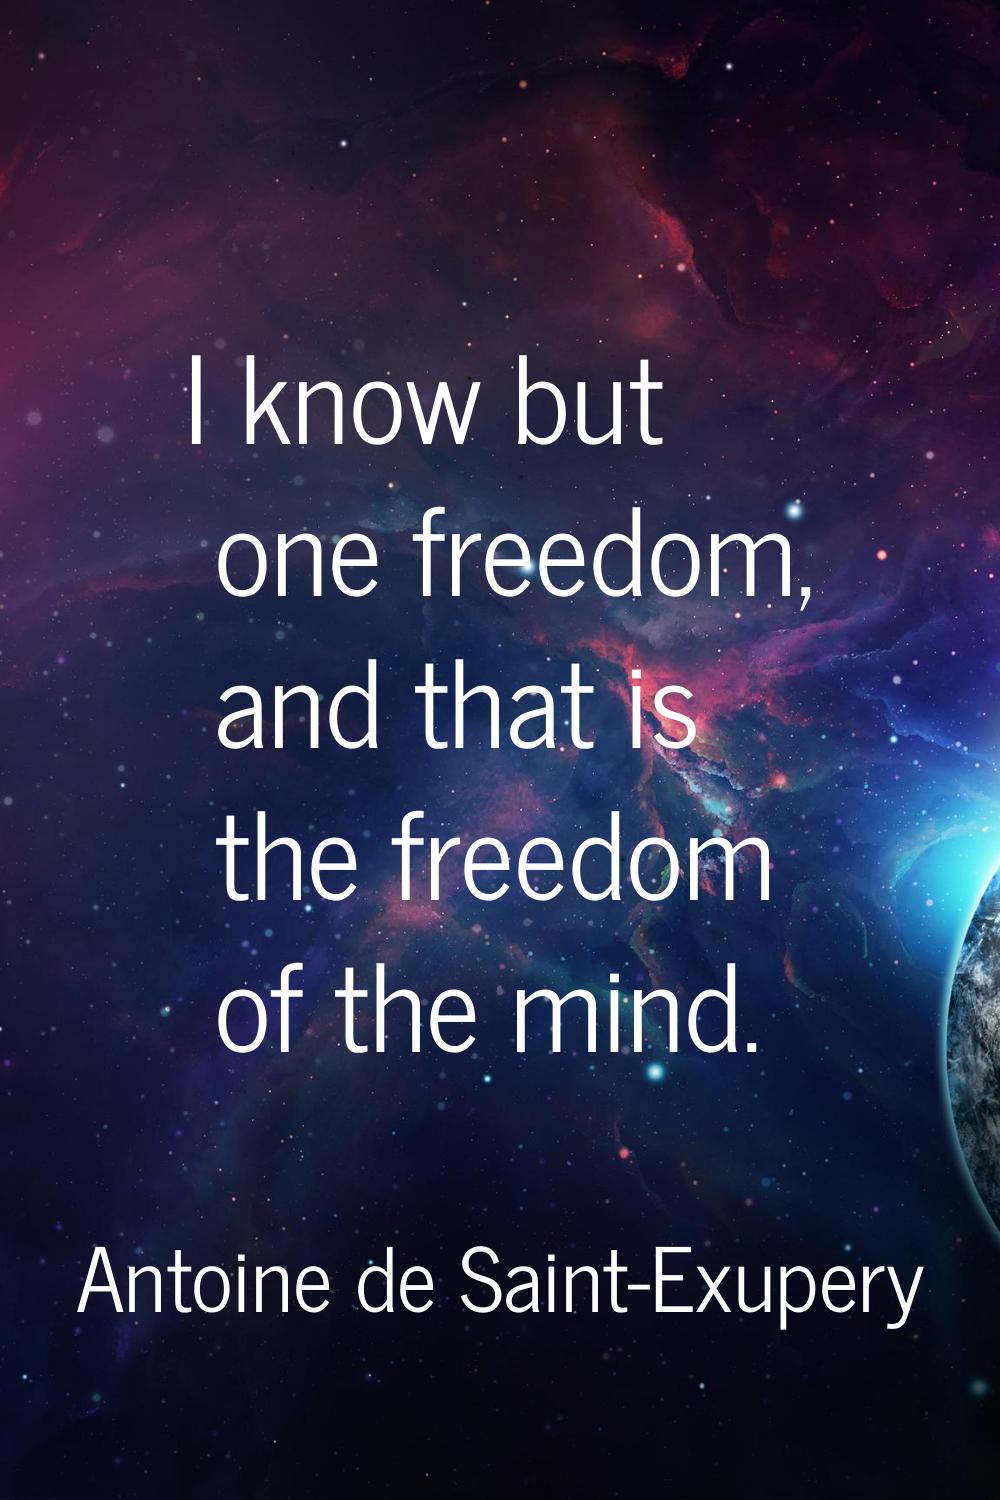 I know but one freedom, and that is the freedom of the mind.